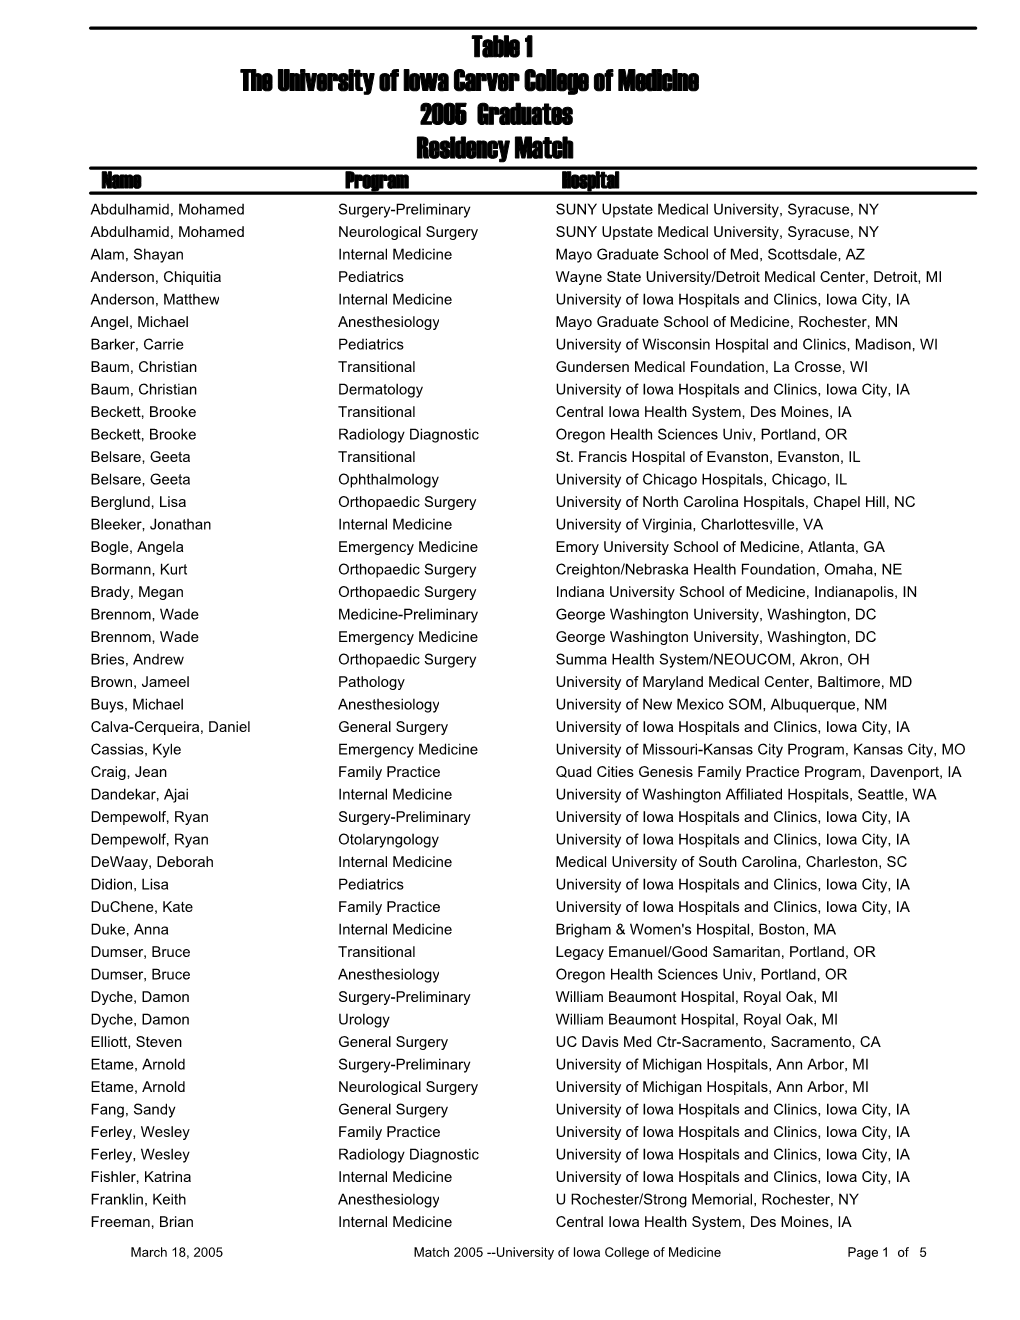 2005 Match Results by Name.Pdf